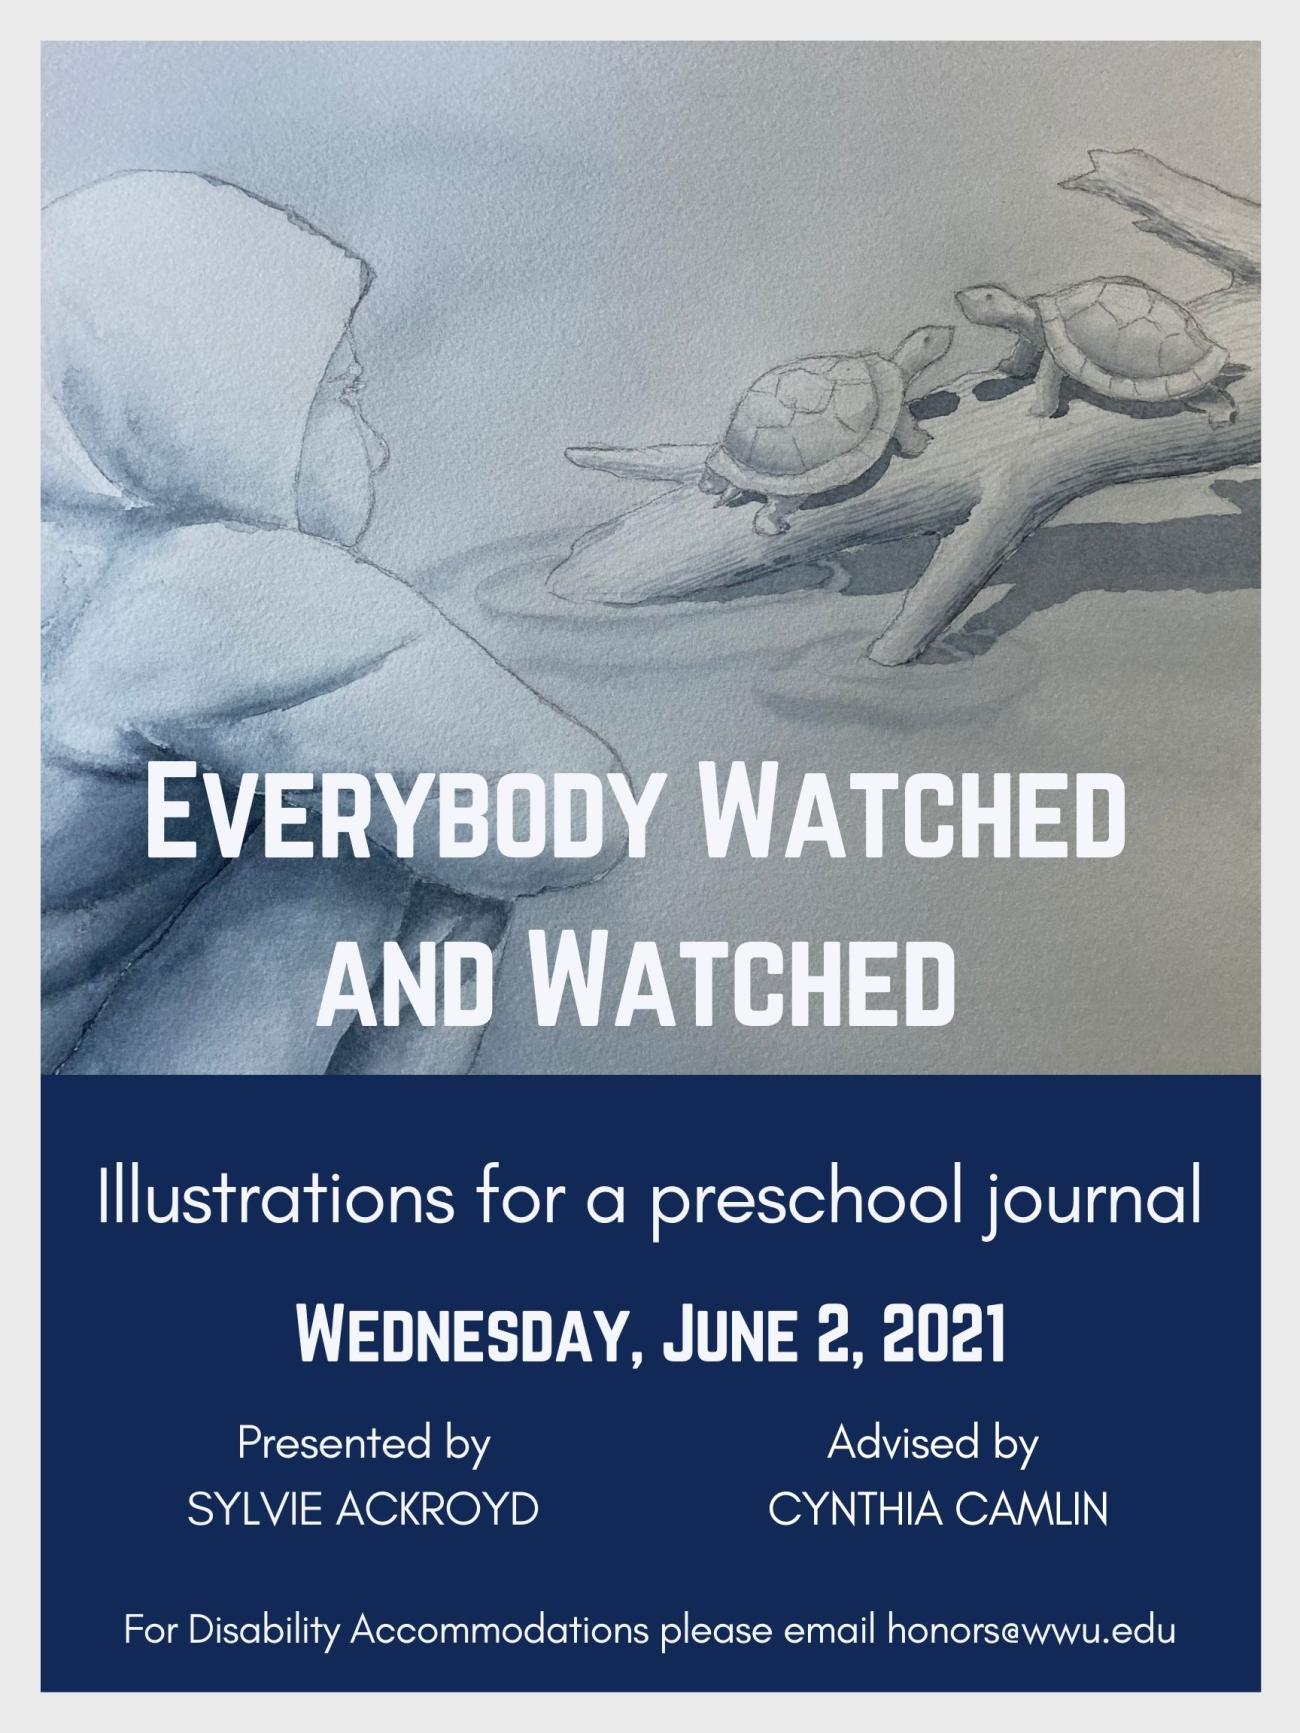 A child wearing a hood looks at two turtles on a log. Text reads: "Everybody Watched and Watched: Illustrations for a preschool journal. Wednesday June 2, 2021. Presented by Sylvie Ackroyd, advised by Cynthia Camlin. For Disability Accommodations please email honors@wwu.edu". 